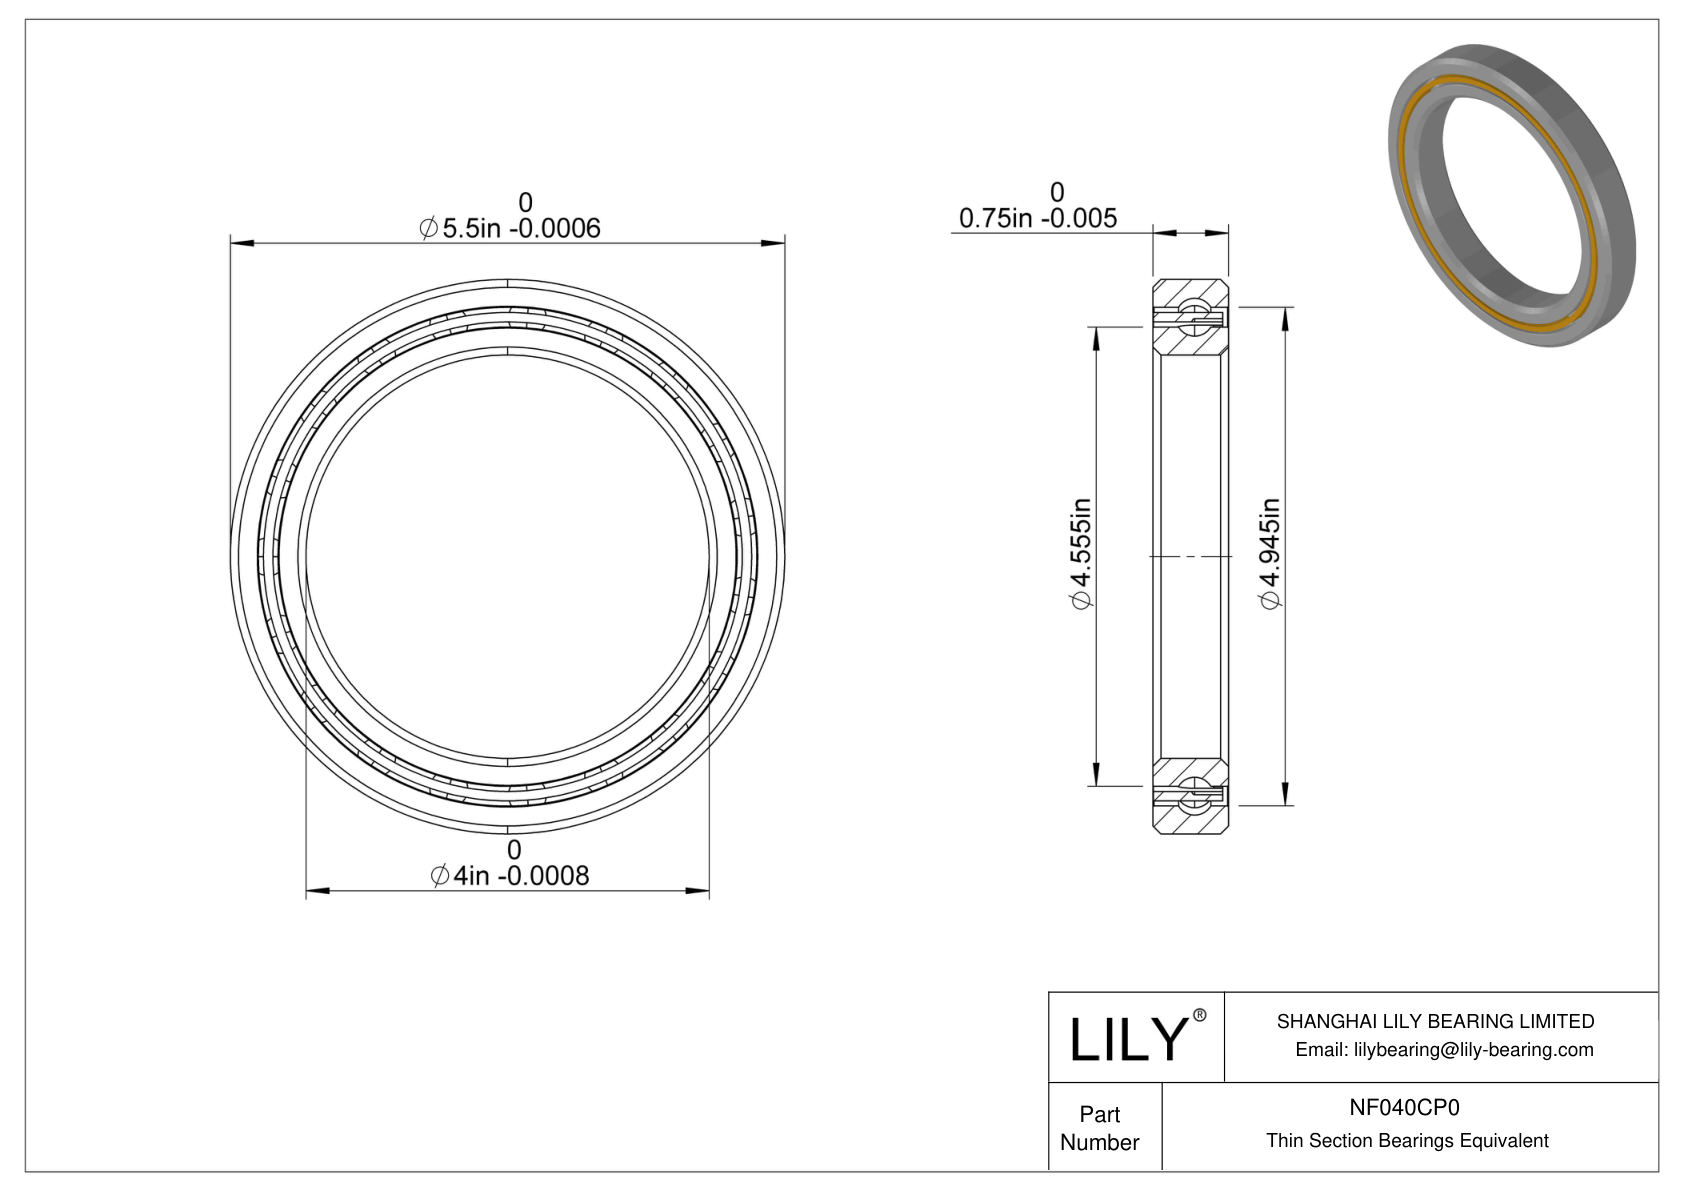 NF040CP0 Constant Section (CS) Bearings cad drawing